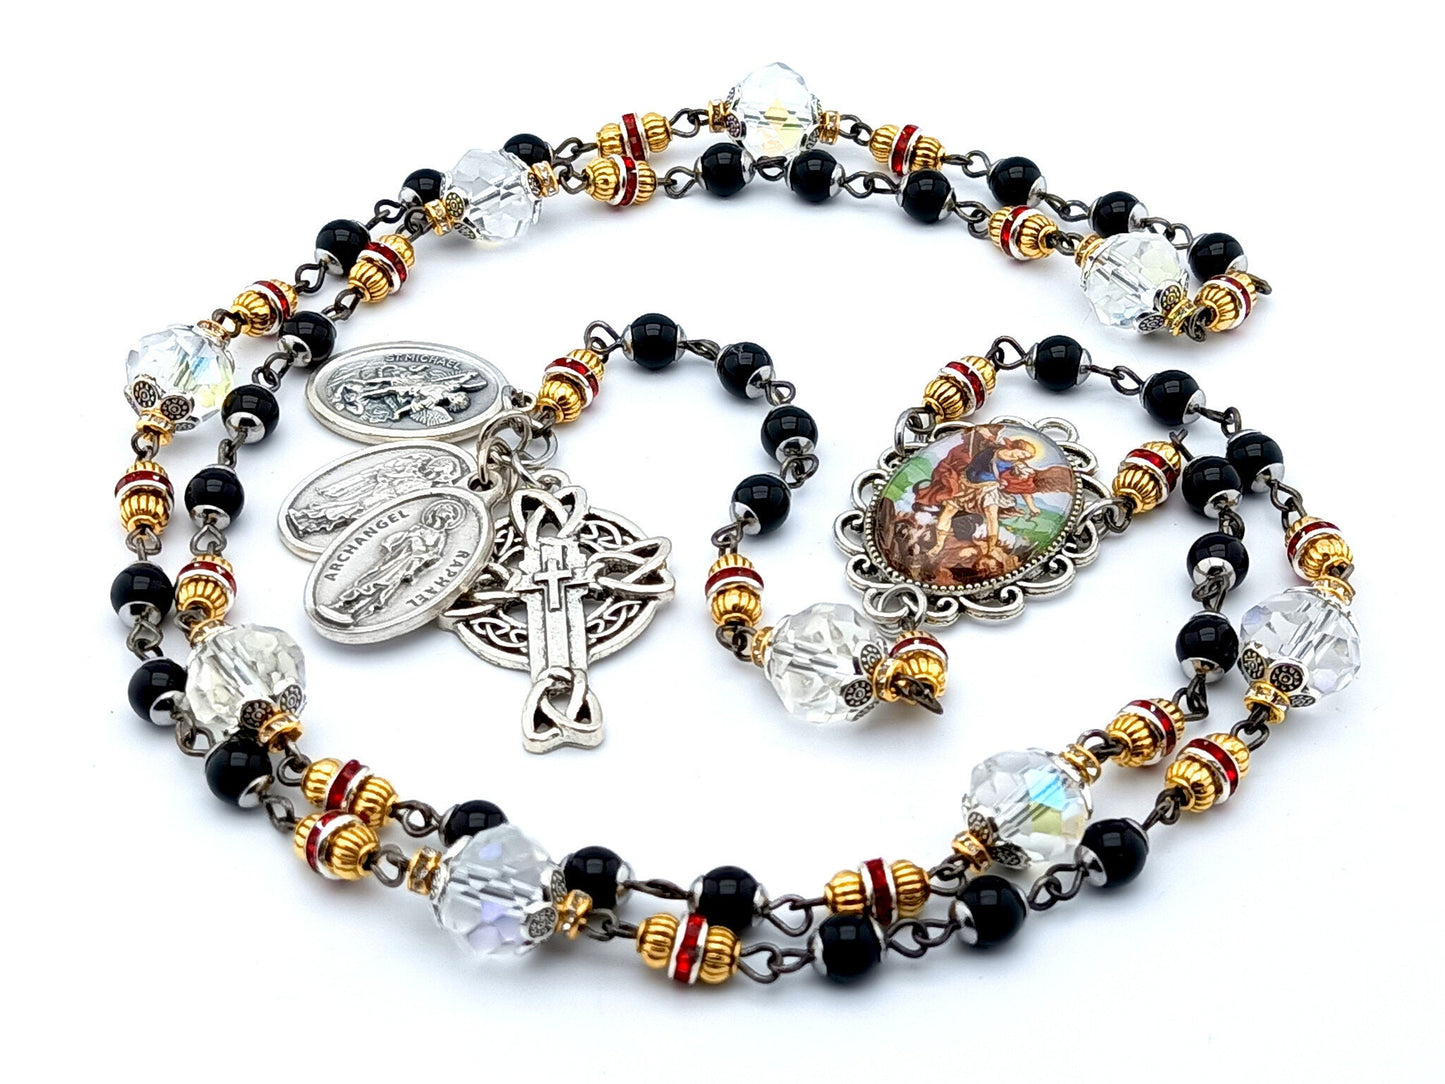 Saint Michael unique rosary beads prayer chaplet with black and clear glass beads, silver angel medals and picture centre medal and crucifix.